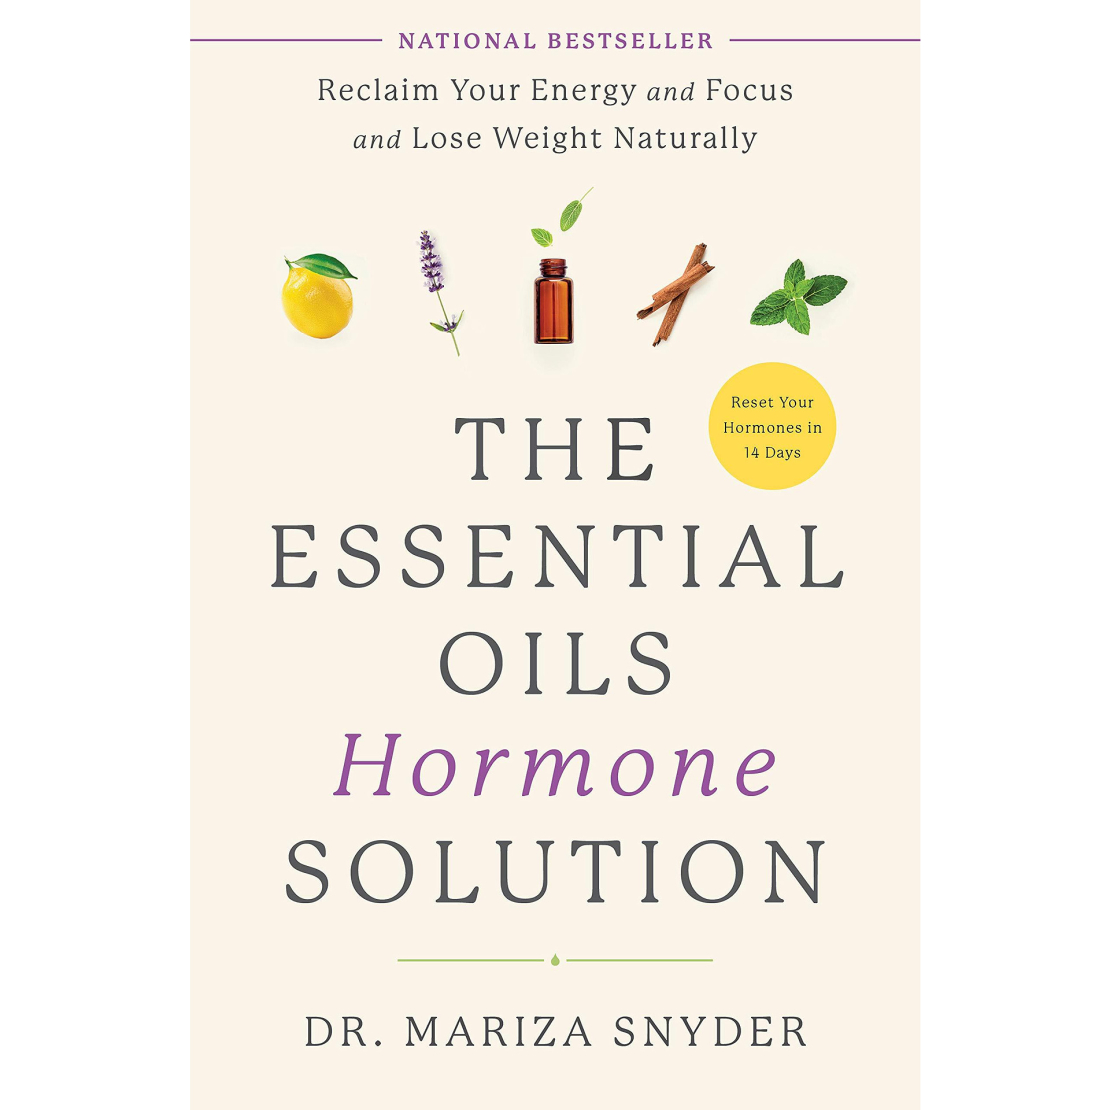 The Essential Oils Hormone Solution by dr. Mariza Snyder (English) (soft cover)